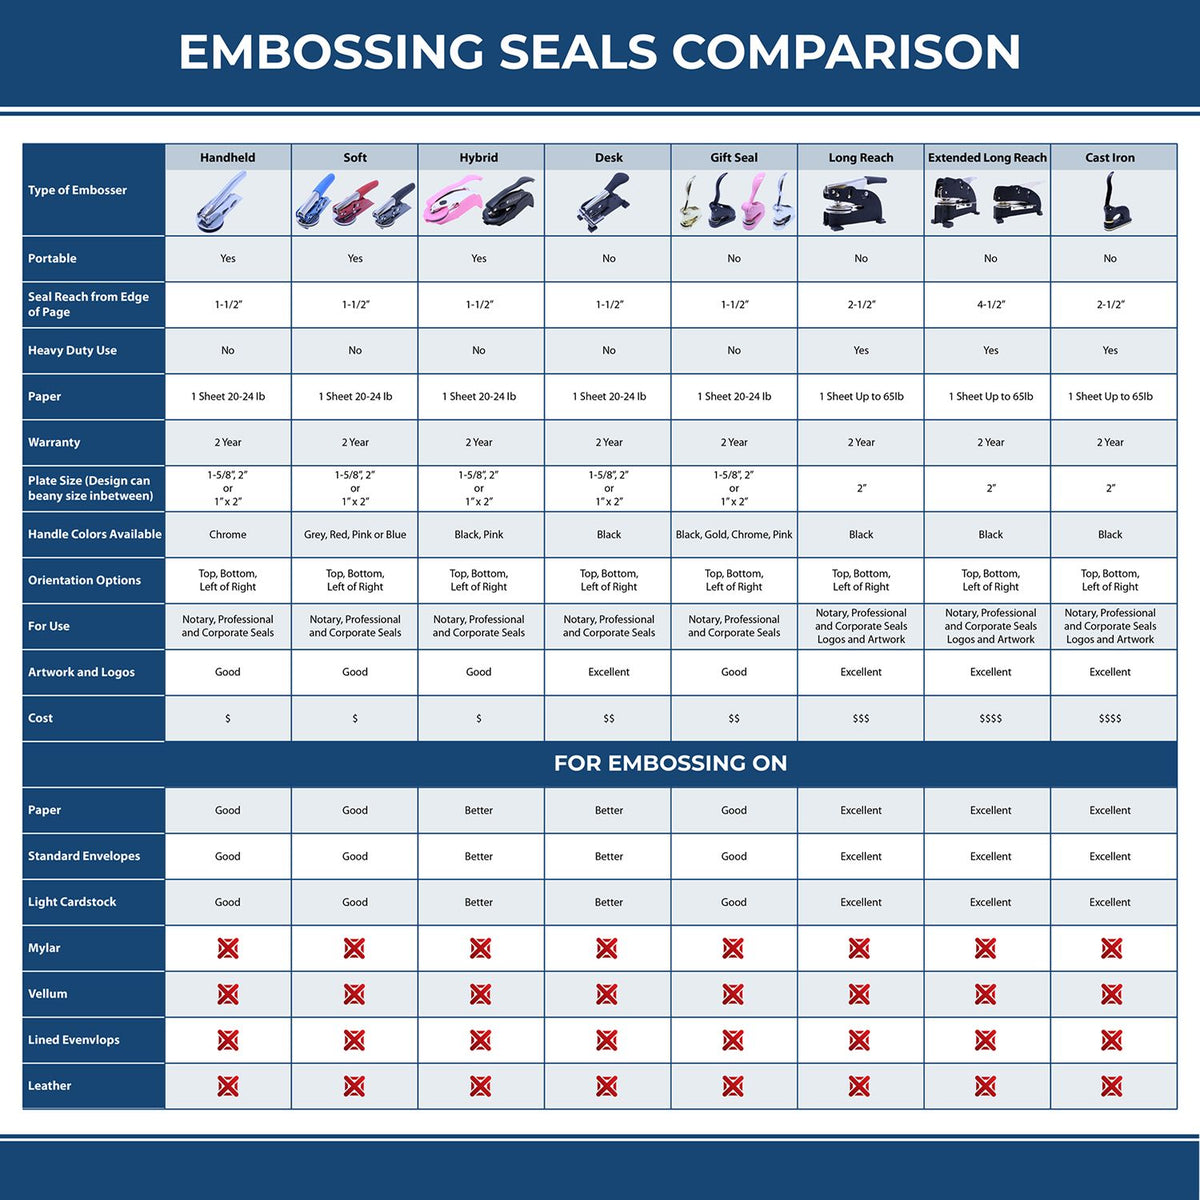 A comparison chart for the different types of mount models available for the Hybrid Maryland Land Surveyor Seal